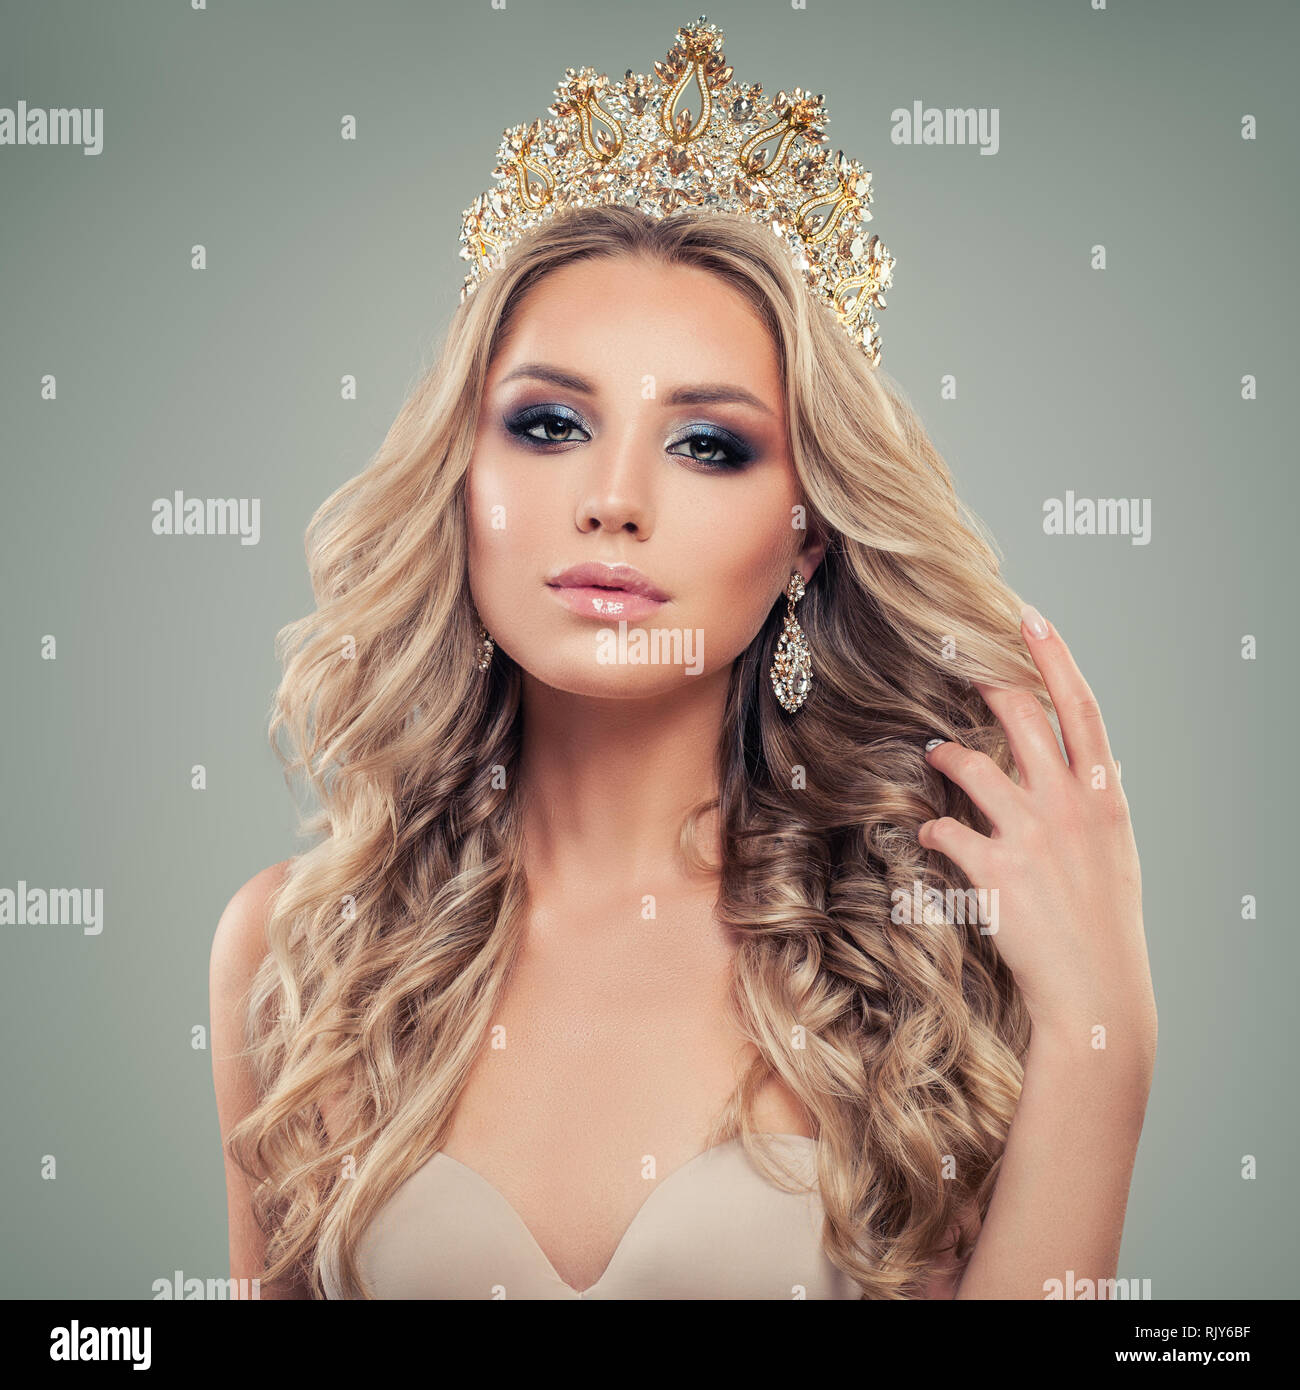 Beautiful Woman In Gold Crown Perfect Blonde Girl With Makeup